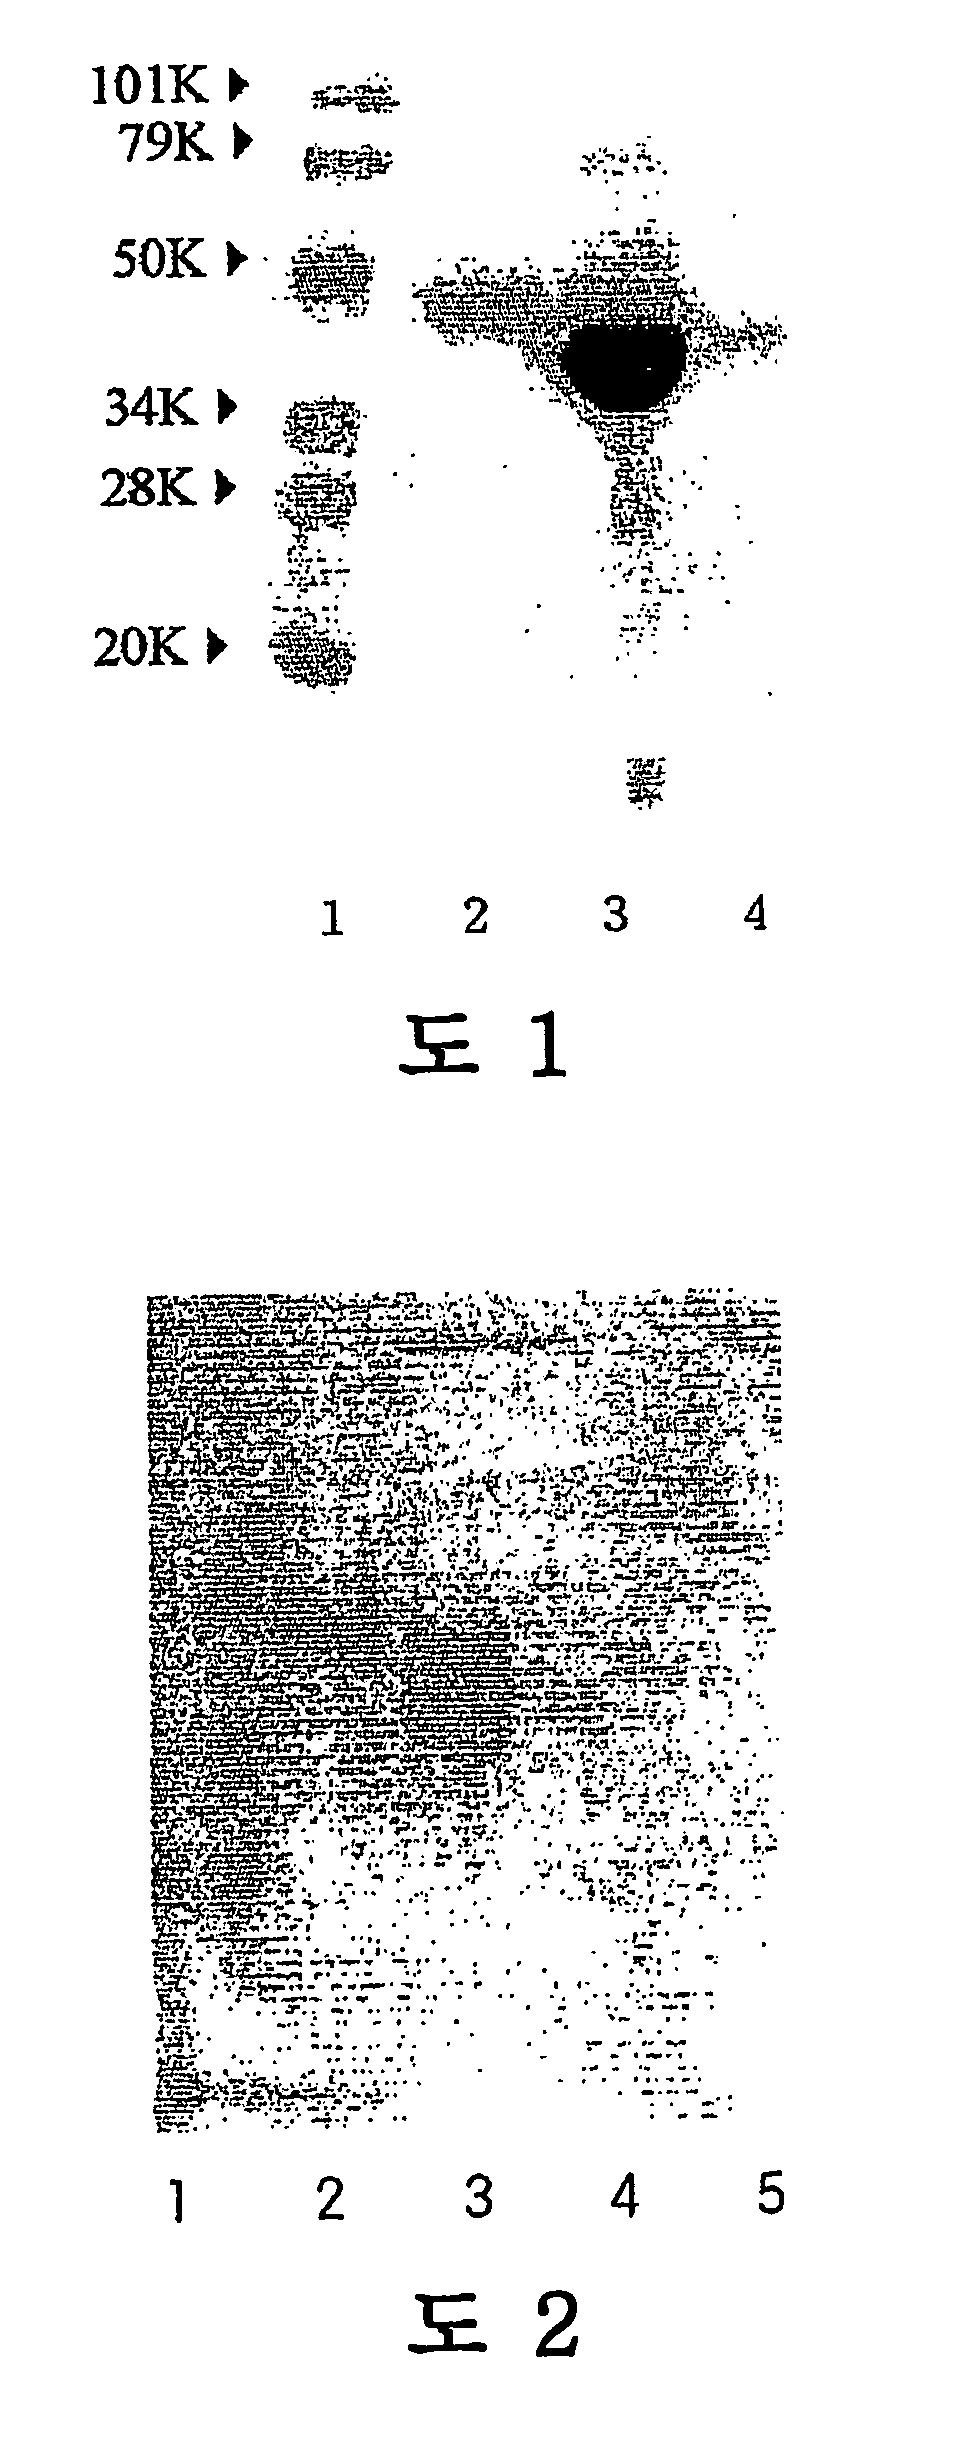 Monoclonal antibody against asialo alpha 1-acid glycoprotein, immunochromatographic strip comprising the monoclonal antibody, and method for diagnosing liver diseases using the immunochromatographic strip